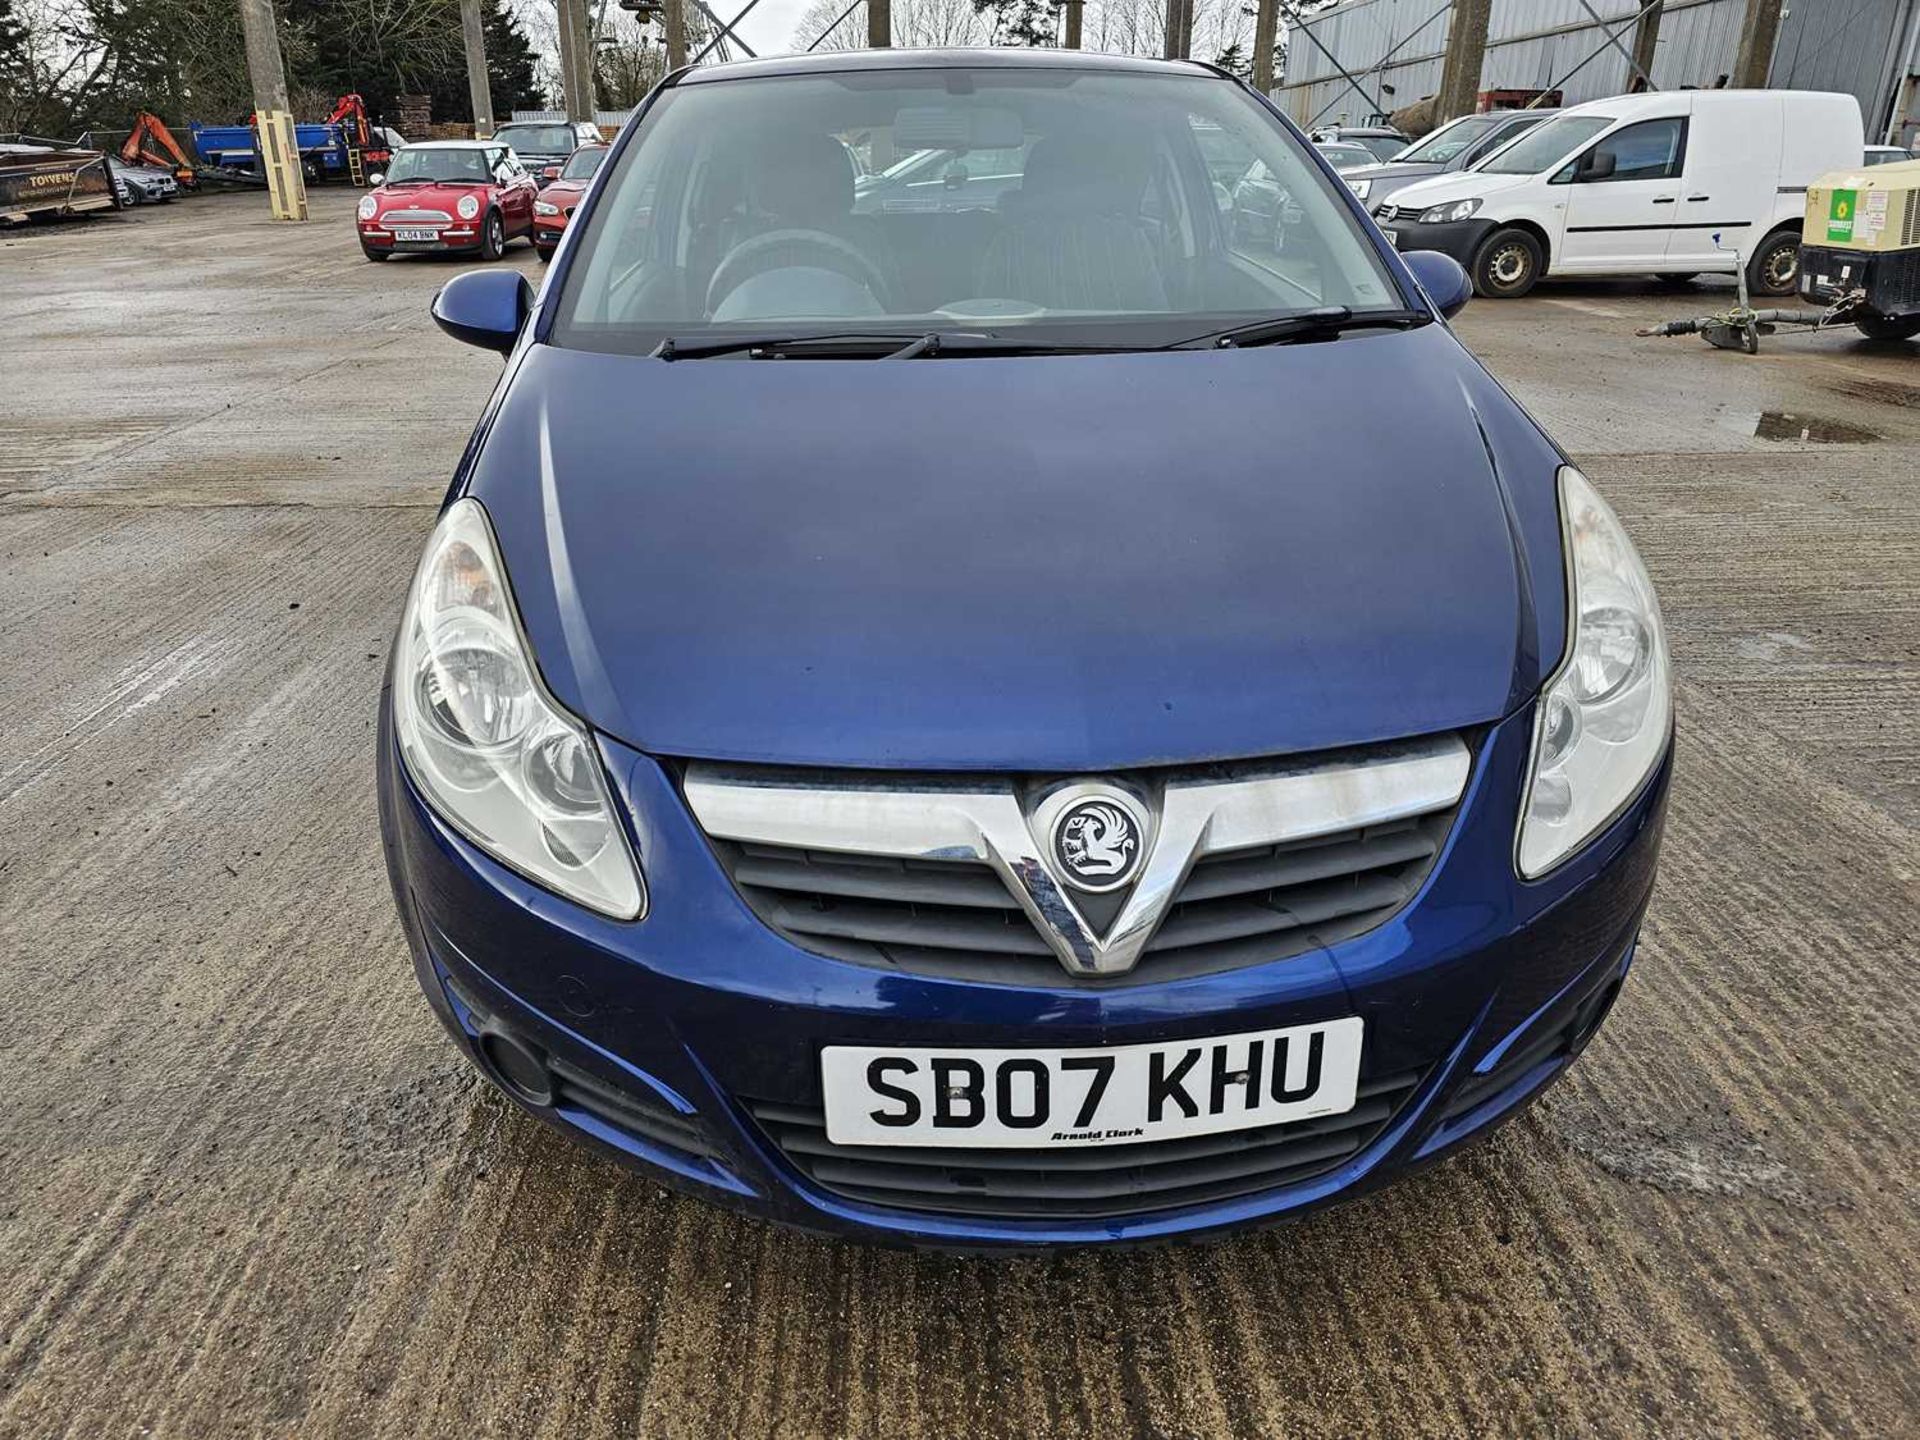 2007 Vauxhall Corsa 1.4, 5 Speed, A/C (Reg. Docs. Available) - Image 3 of 29